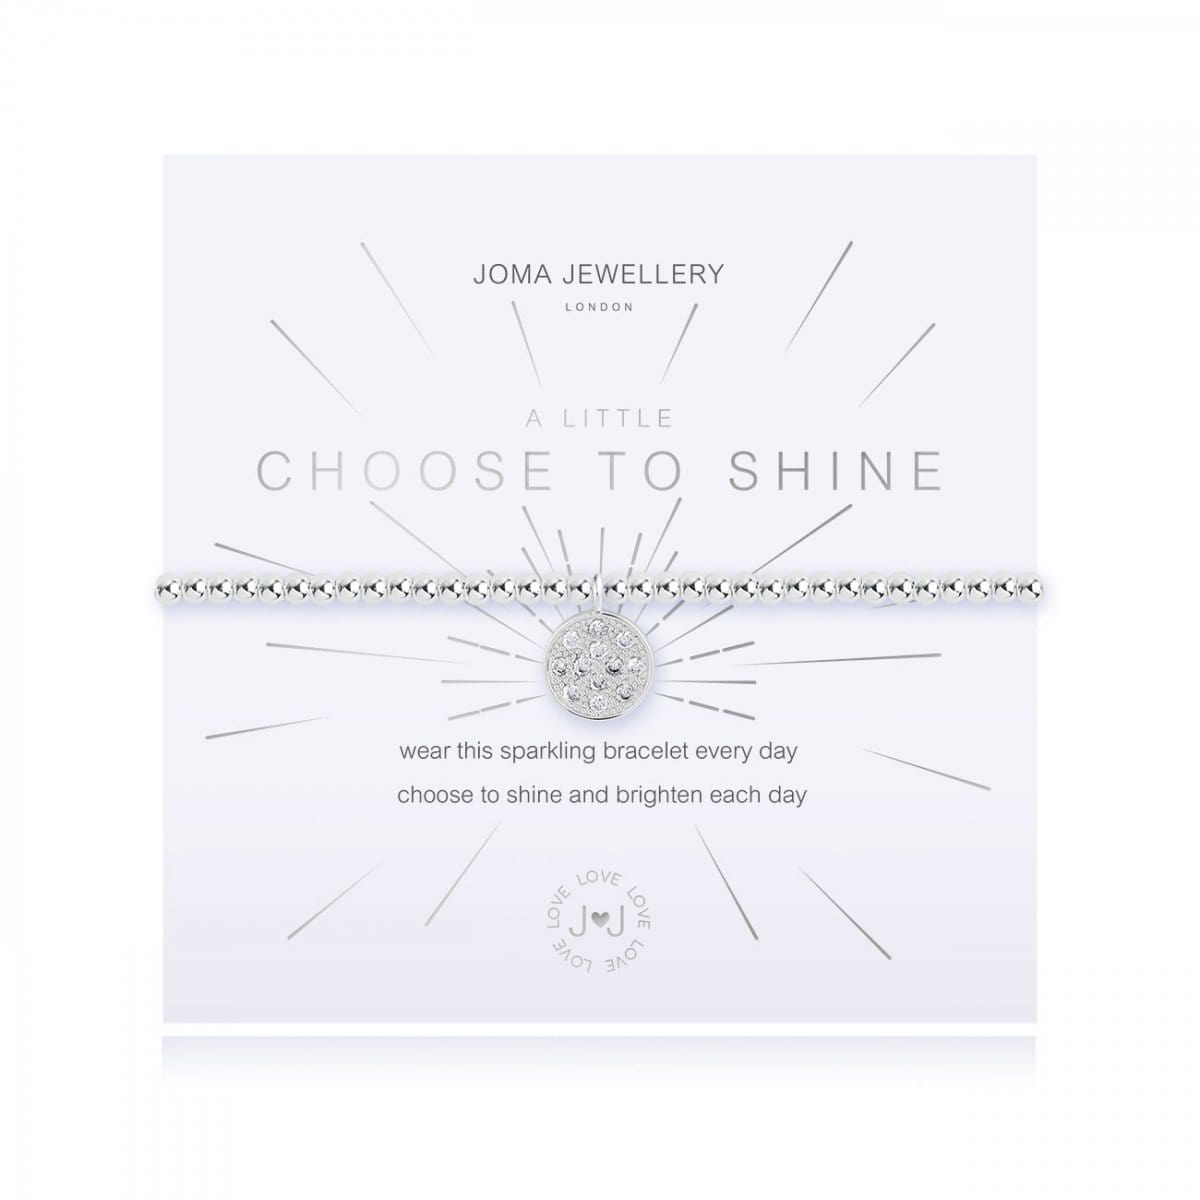 Joma Jewellery Bracelet Joma Jewellery Bracelet - A Little Choose to Shine